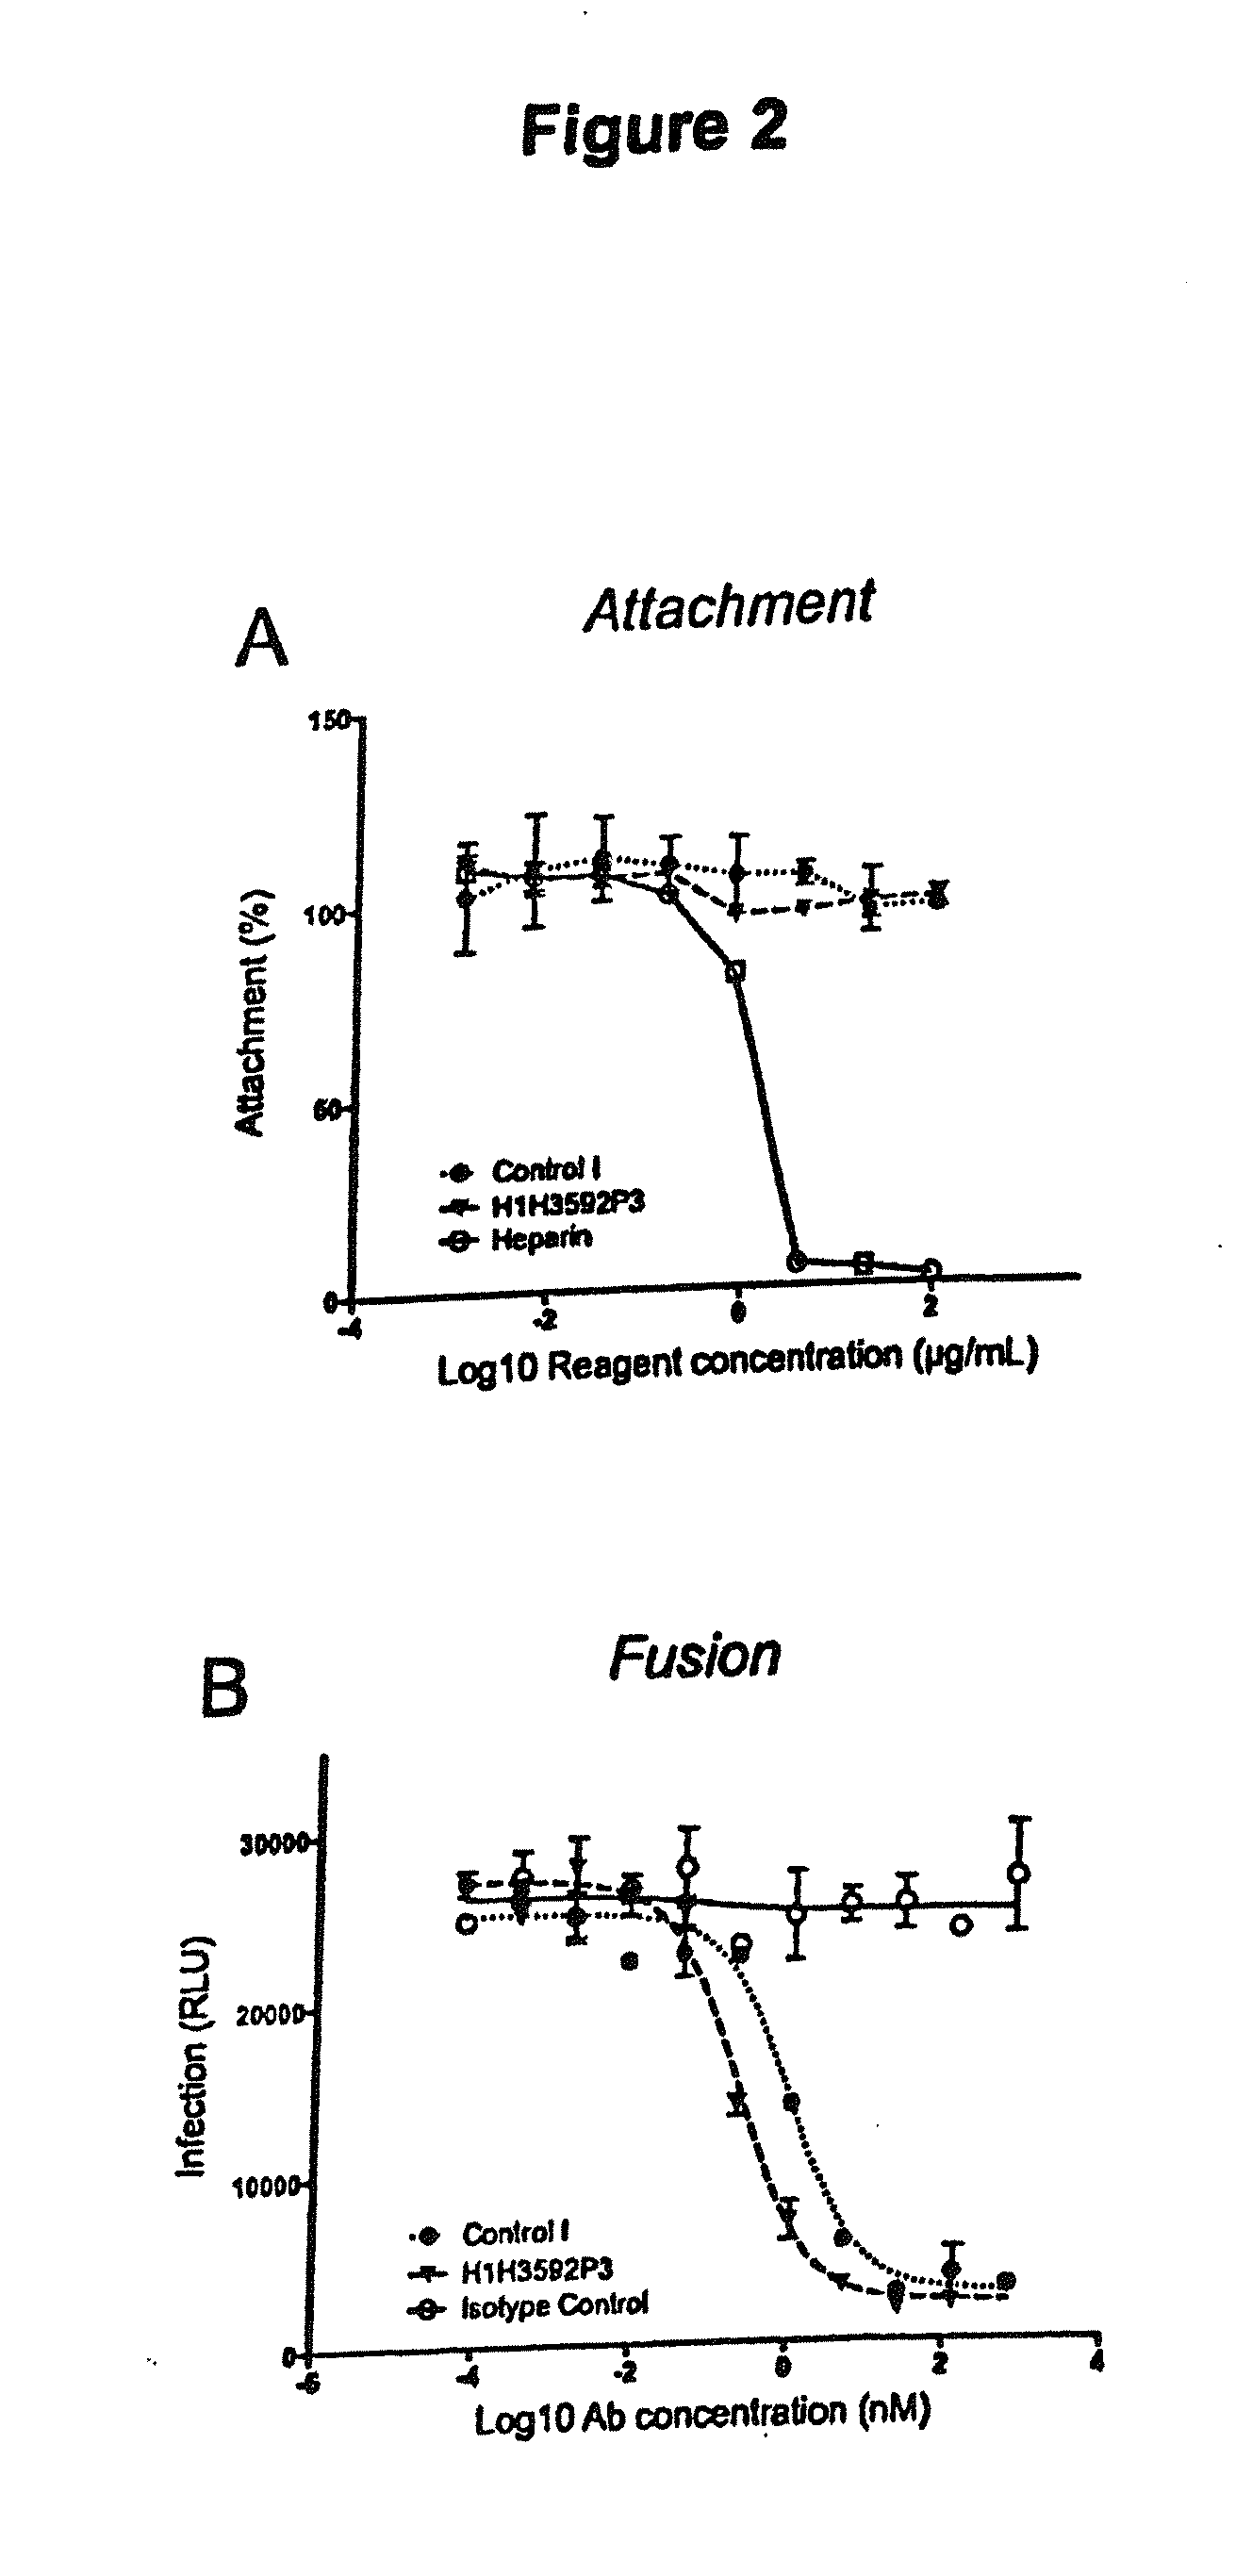 Human antibodies to respiratory syncytial virus f protein and methods of use thereof